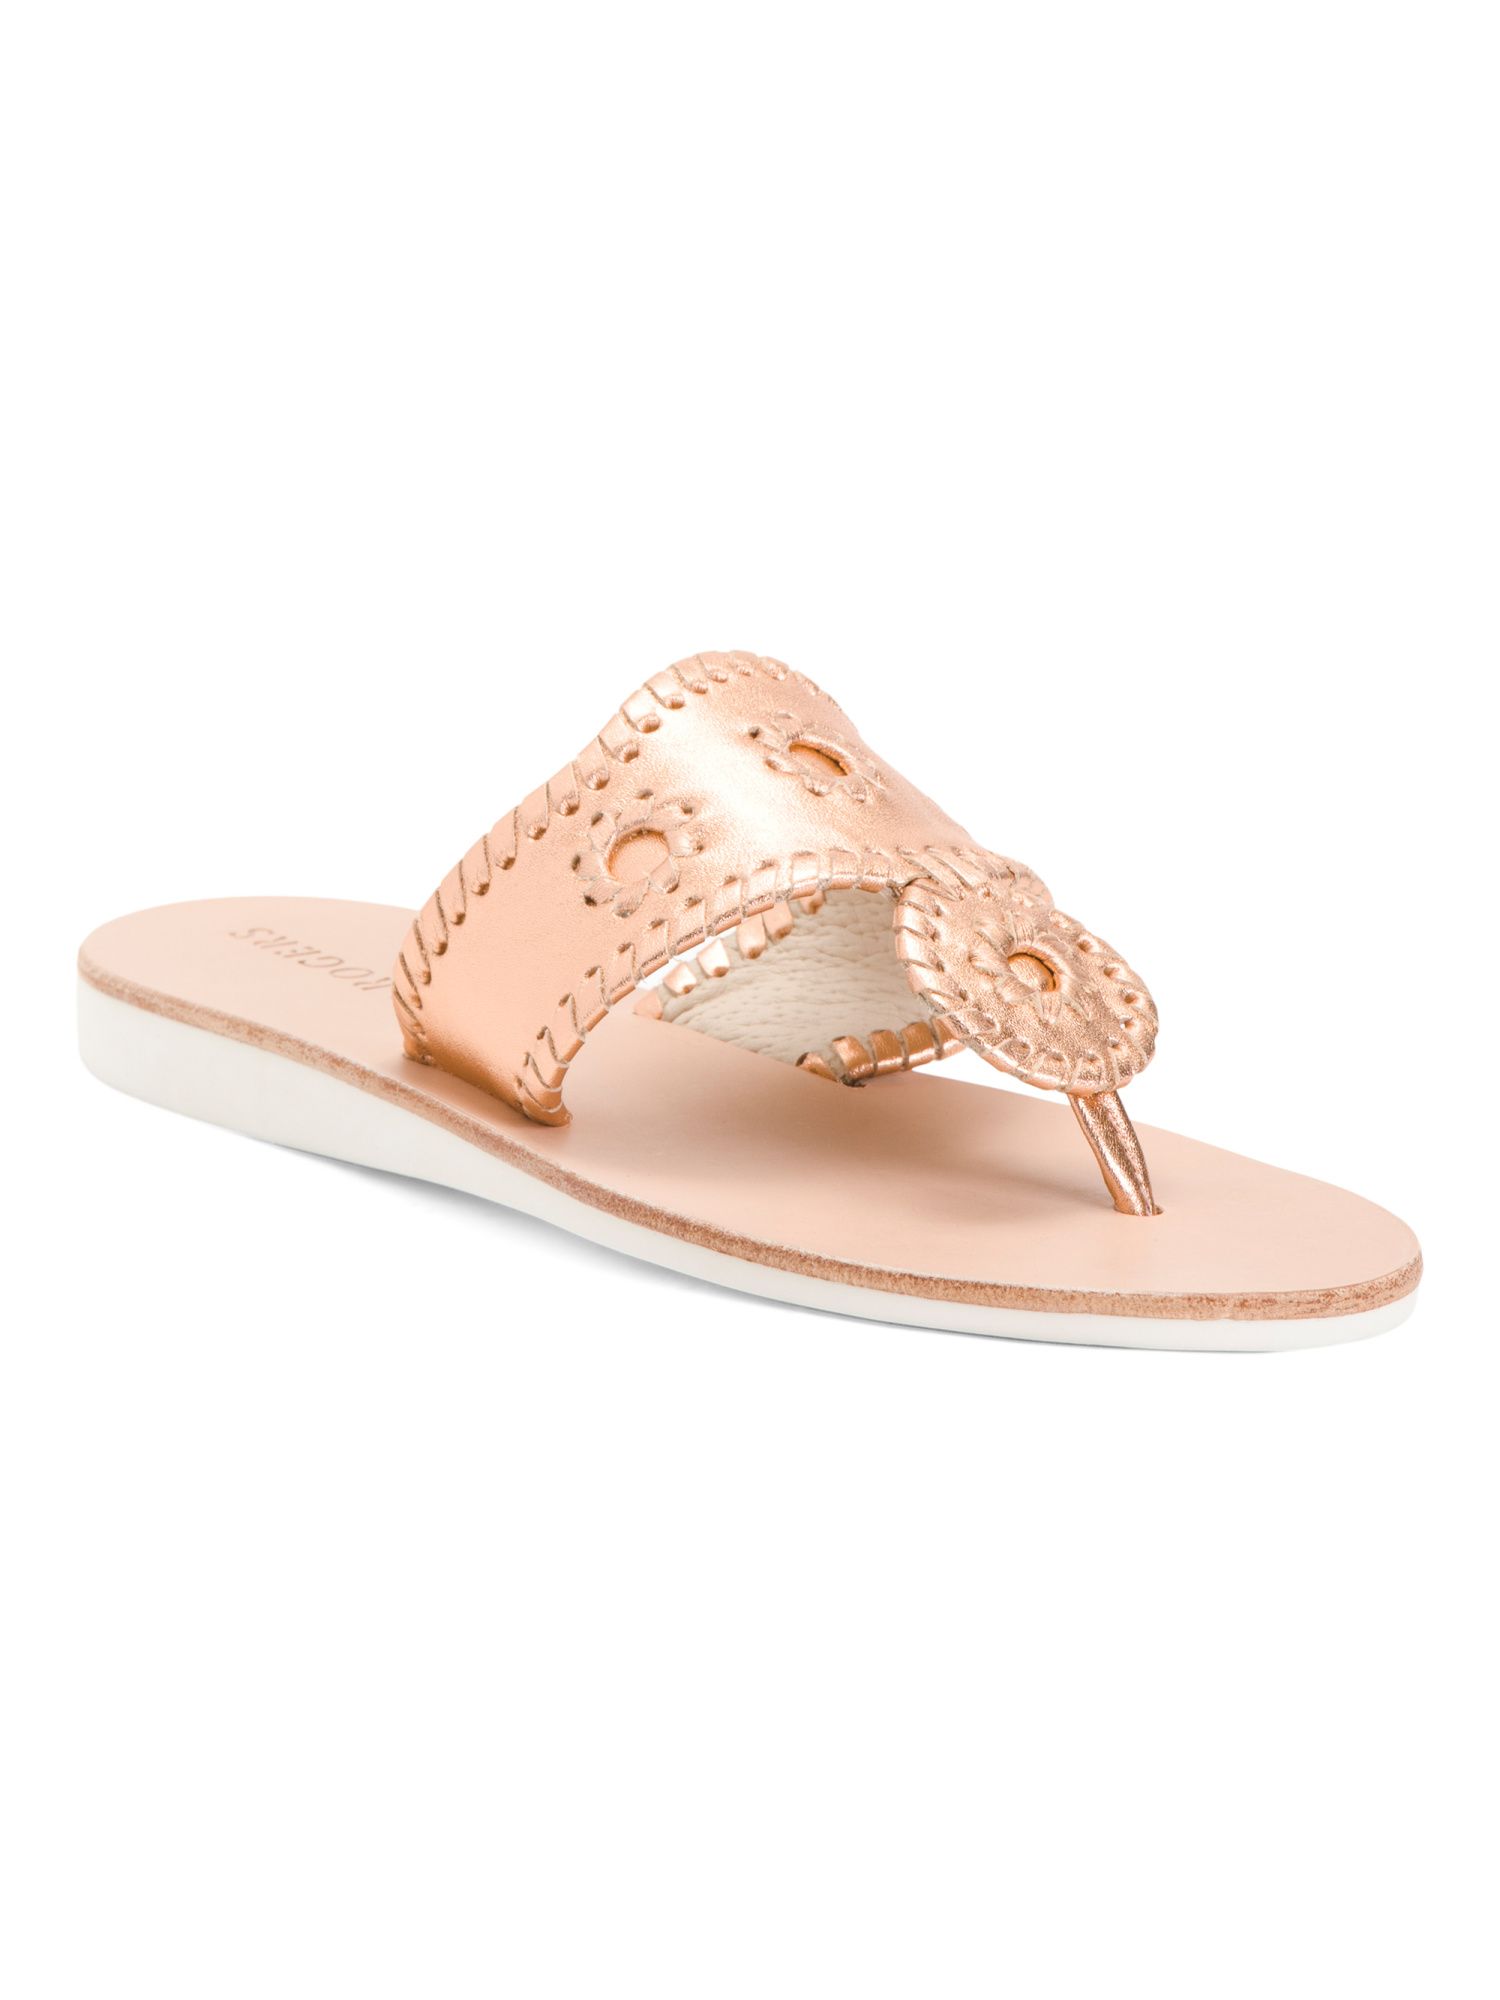 Made In Brazil Leather Comfort Sandals | Women's Shoes | Marshalls | Marshalls